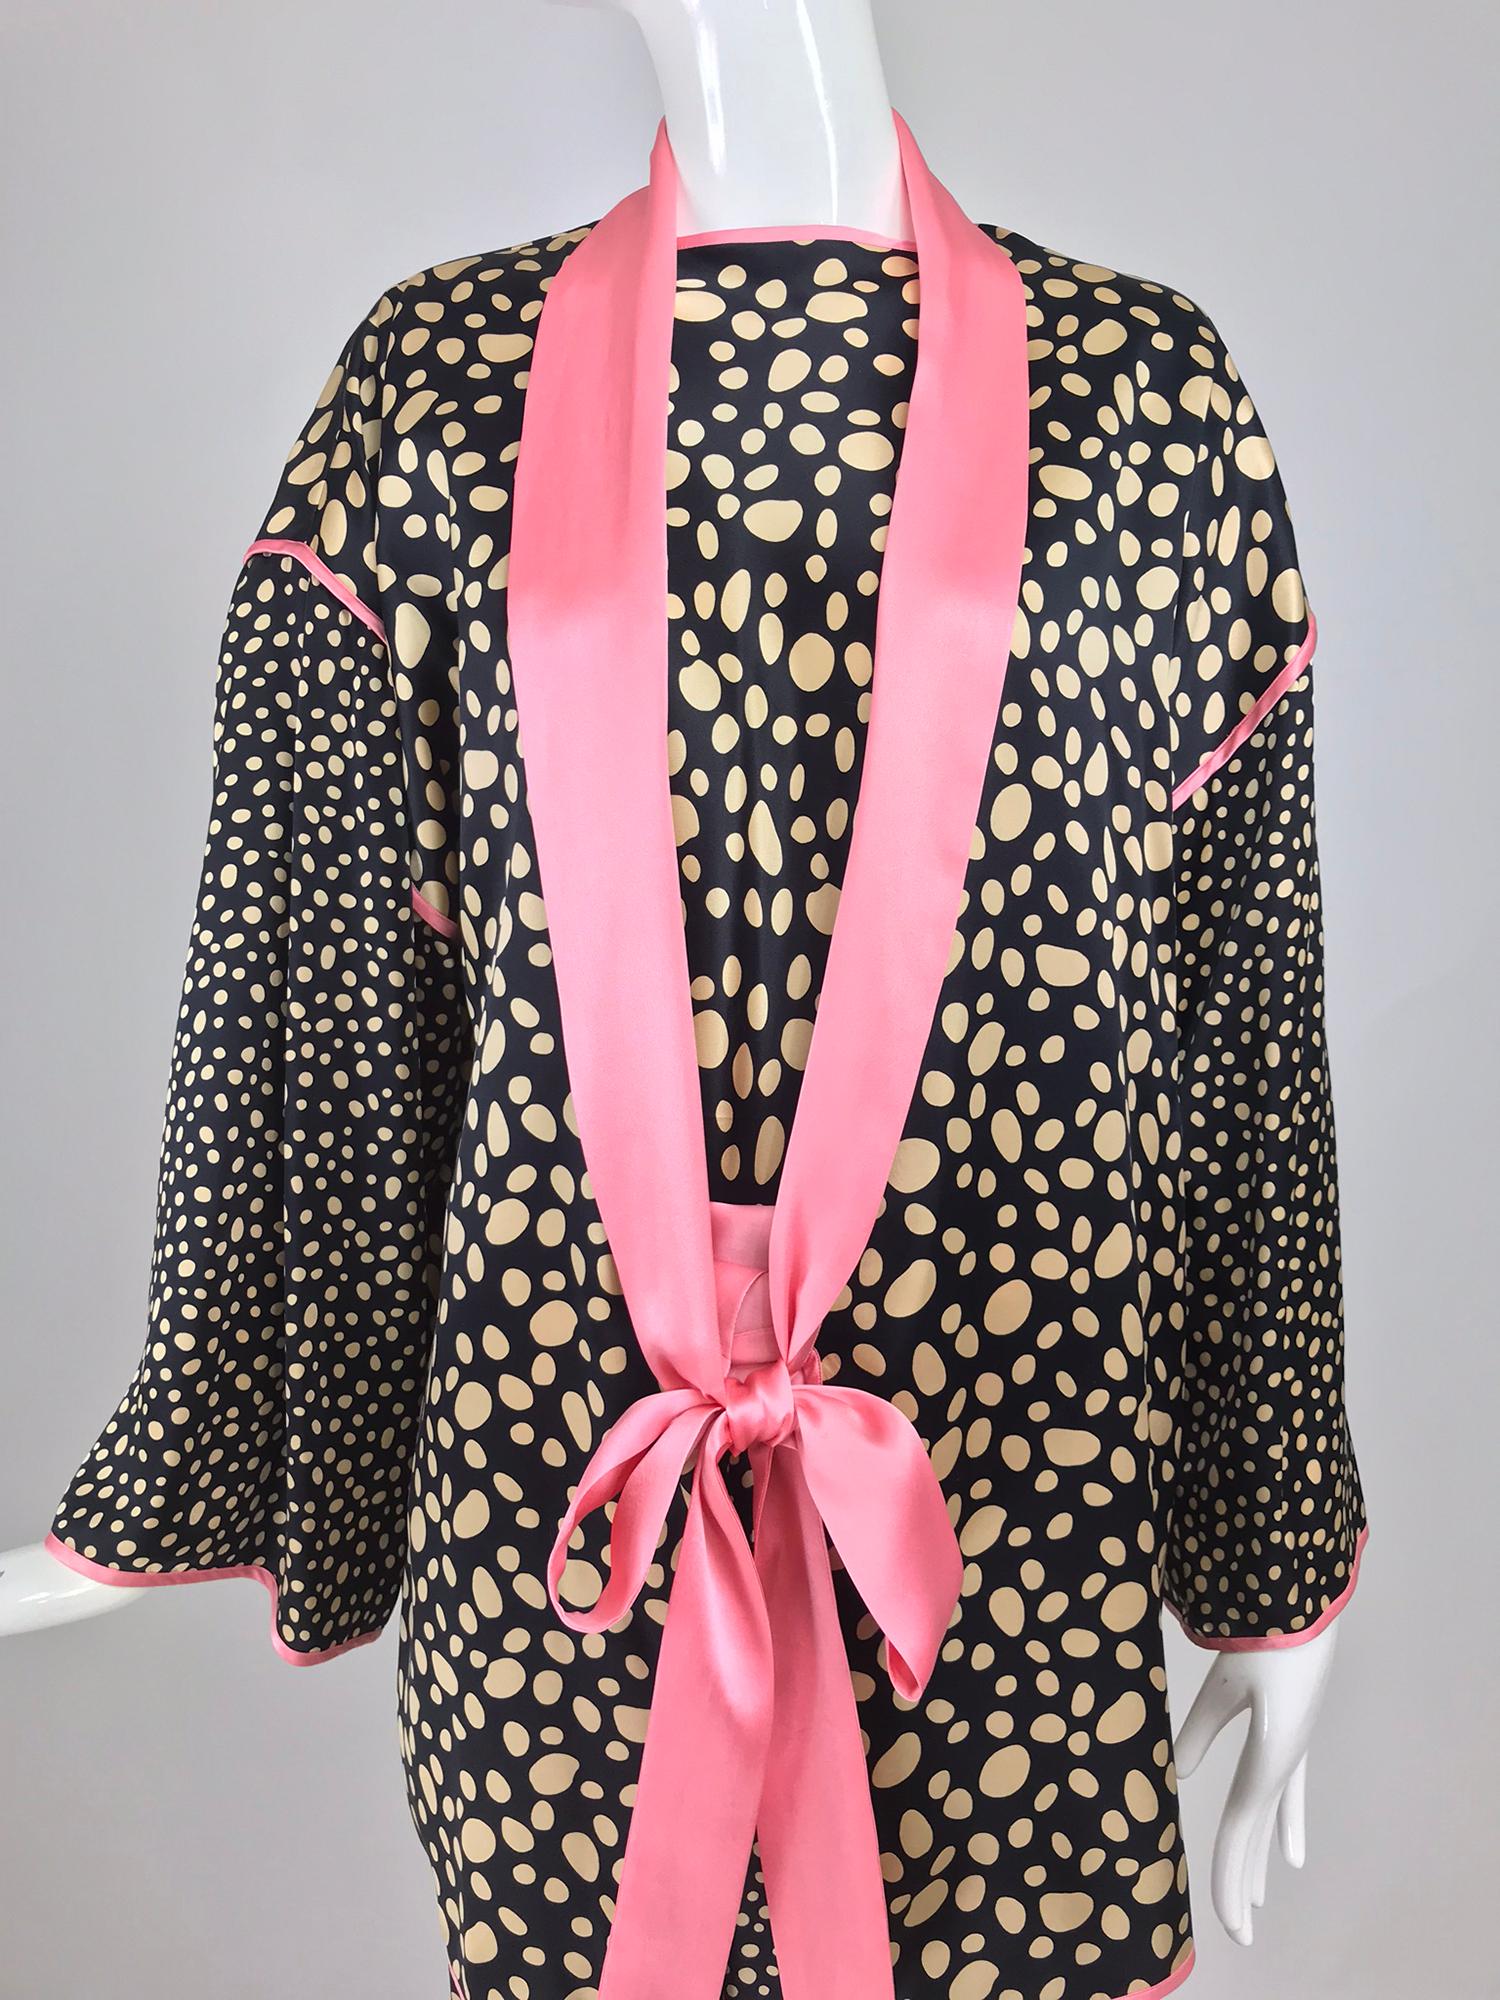 Guy Laroche Silk Evening Pajama set in Cream and Black Dots Pink Trim 1990s For Sale 6